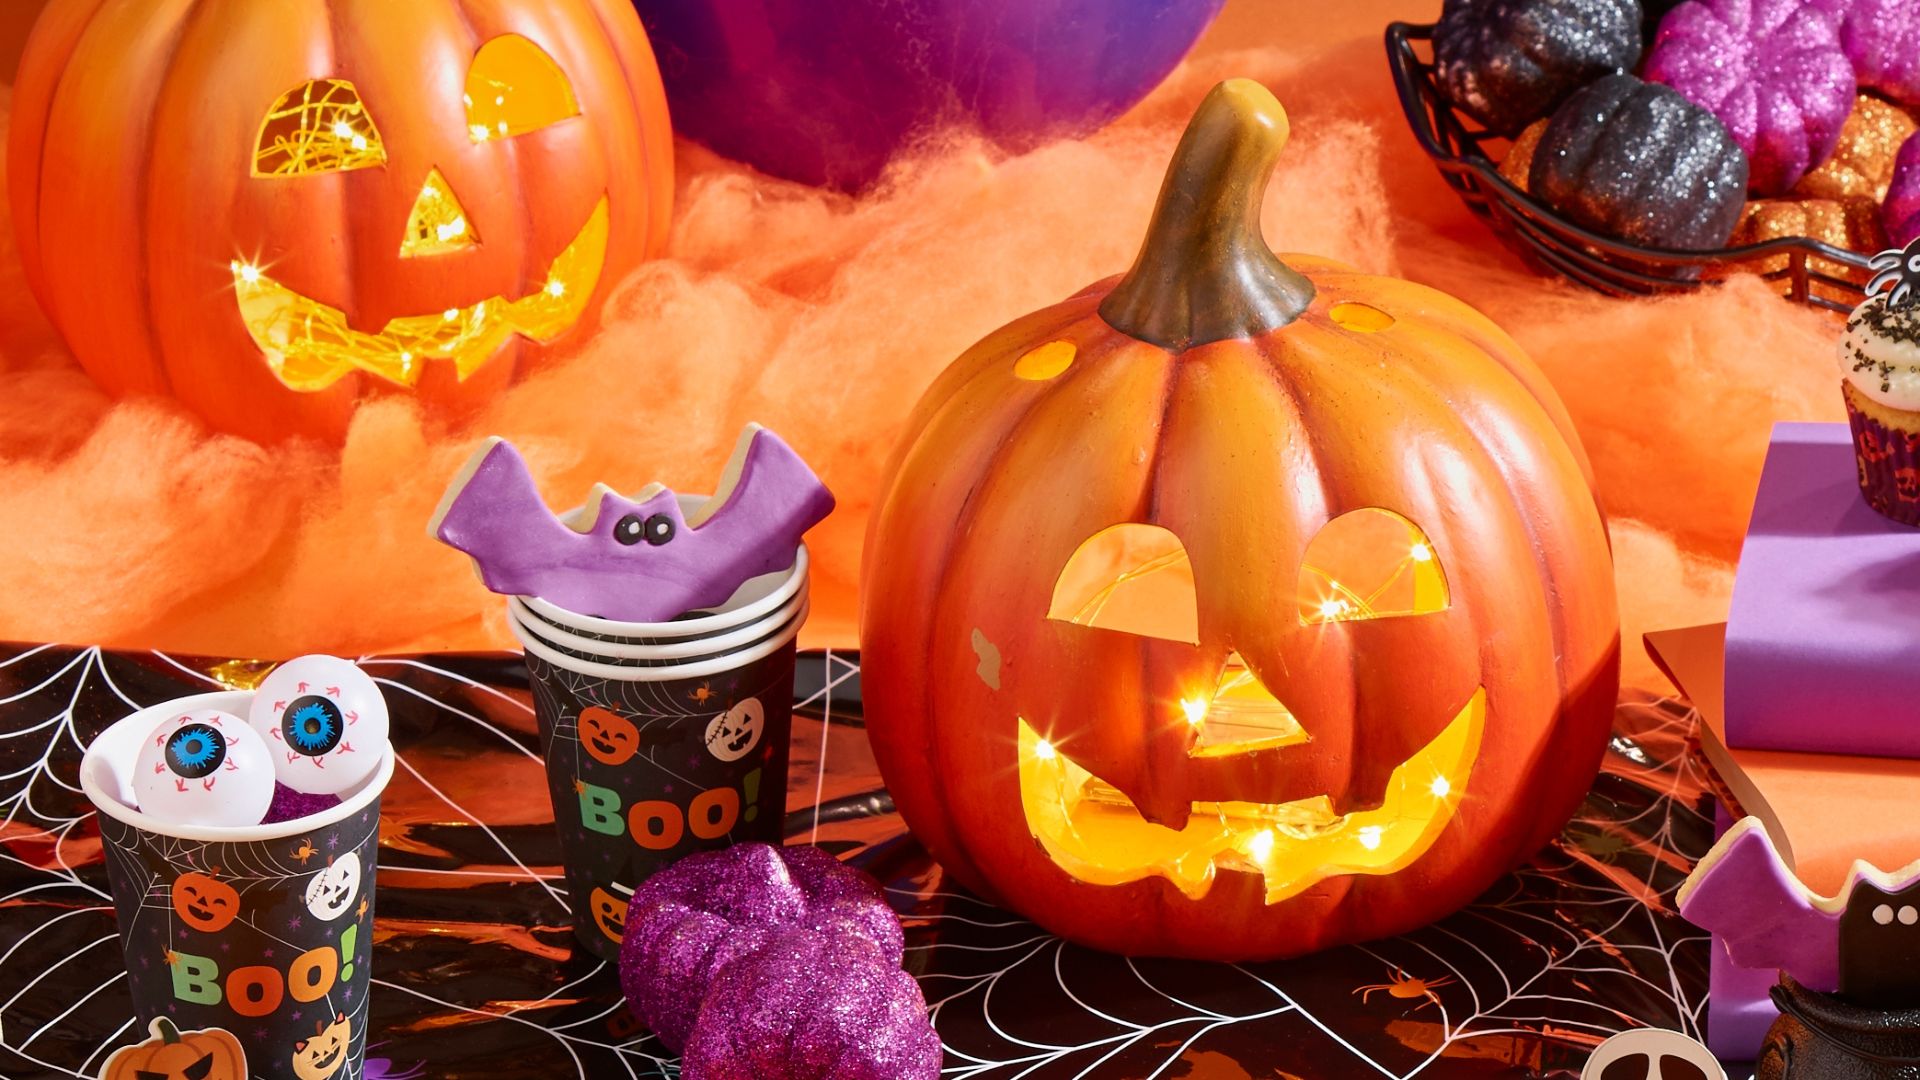 Host a Halloween party and serve up a feast in festive spooky partyware